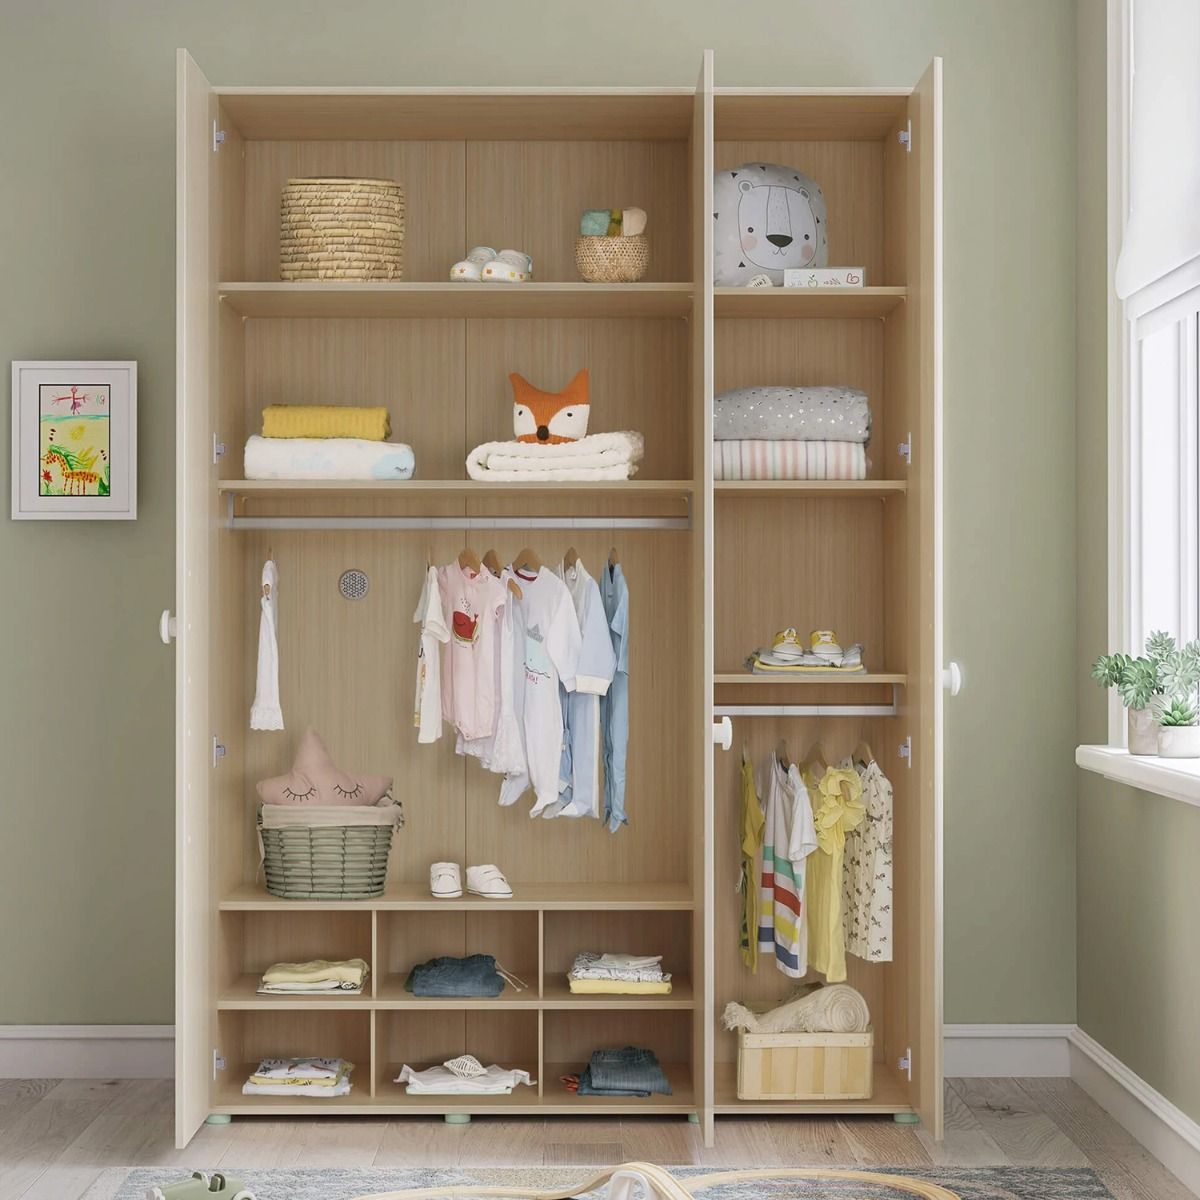 Organizing Children’s Clothing Storage: A Guide to Wardrobe Solutions